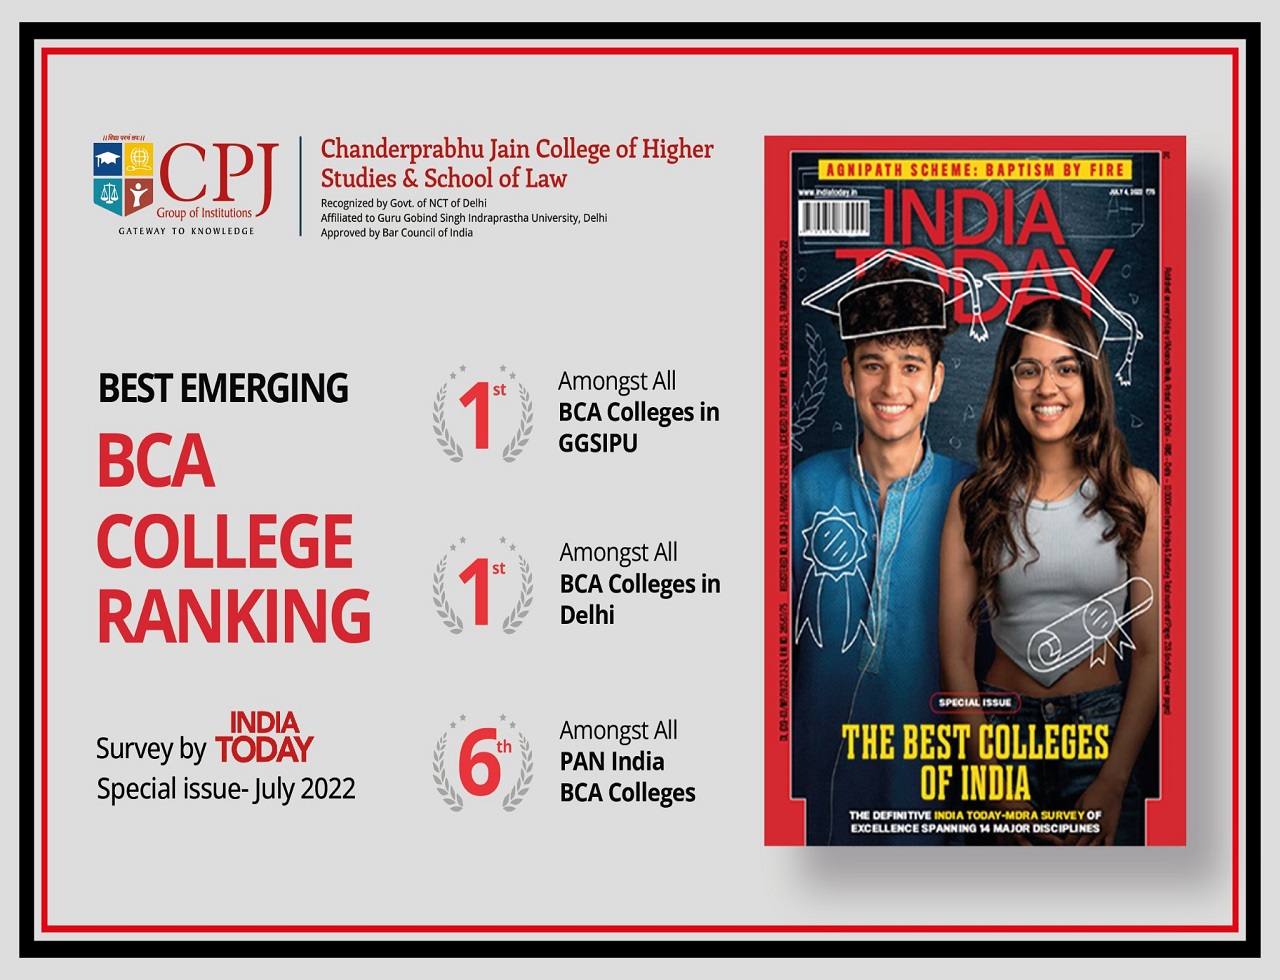 India Today Survey in the Category of Best Emerging BCA Colleges